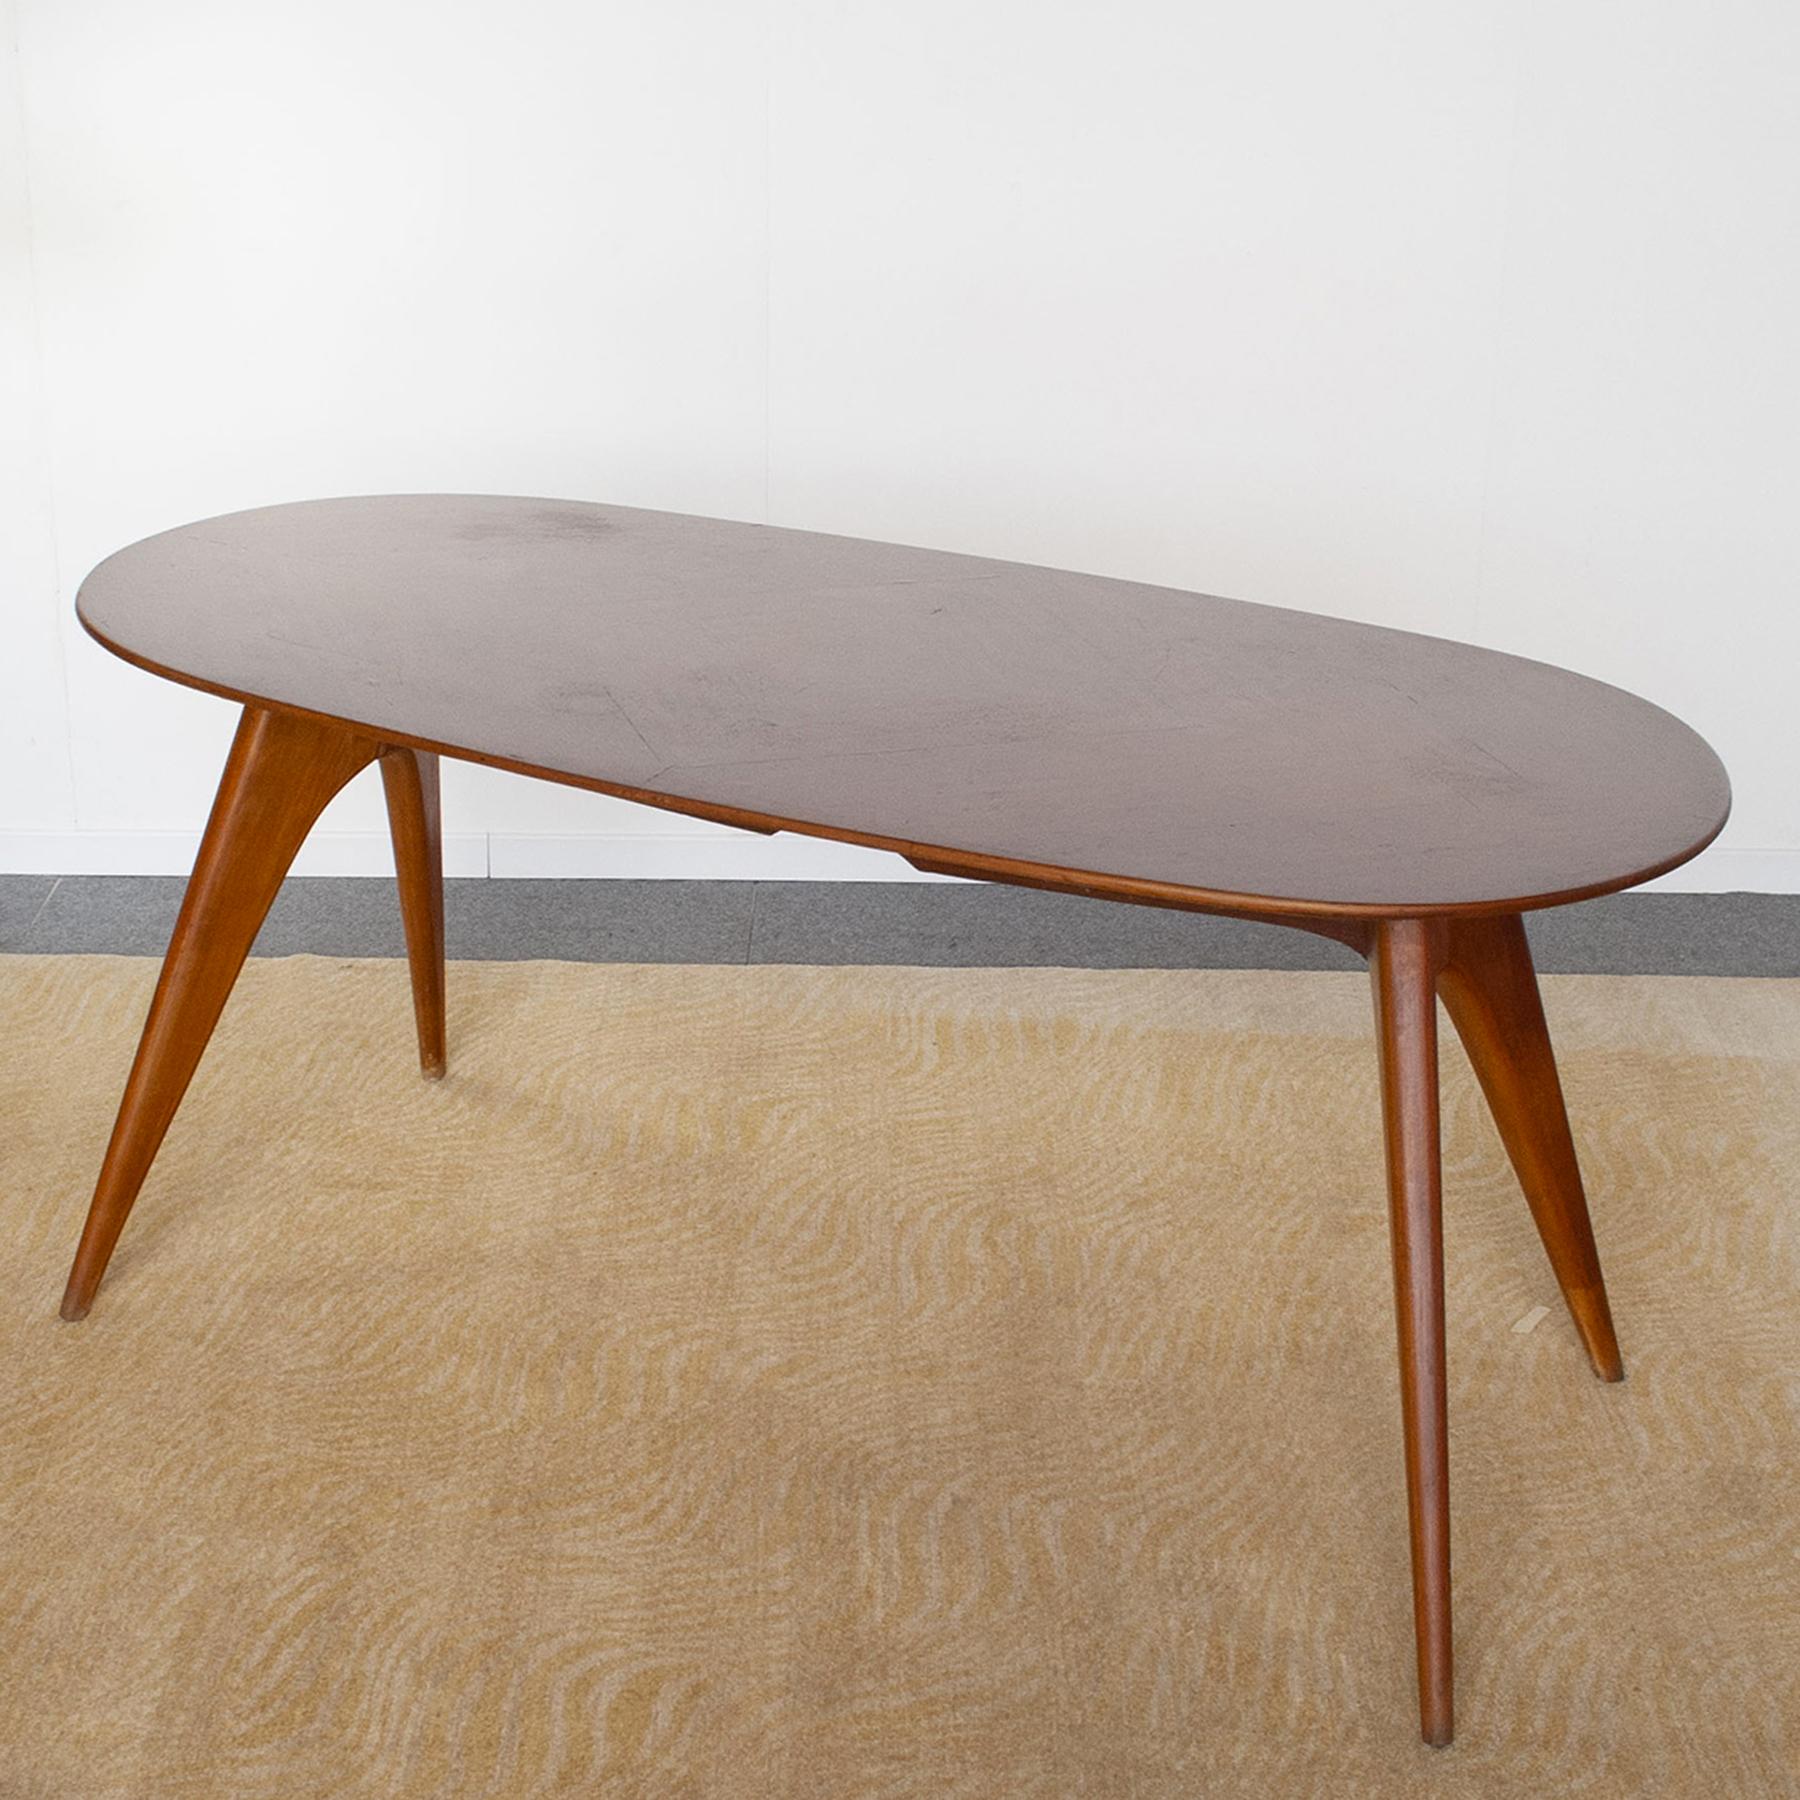 Elegant oval wooden table design ico parisi 60s produced by Fratelli Rizzi.